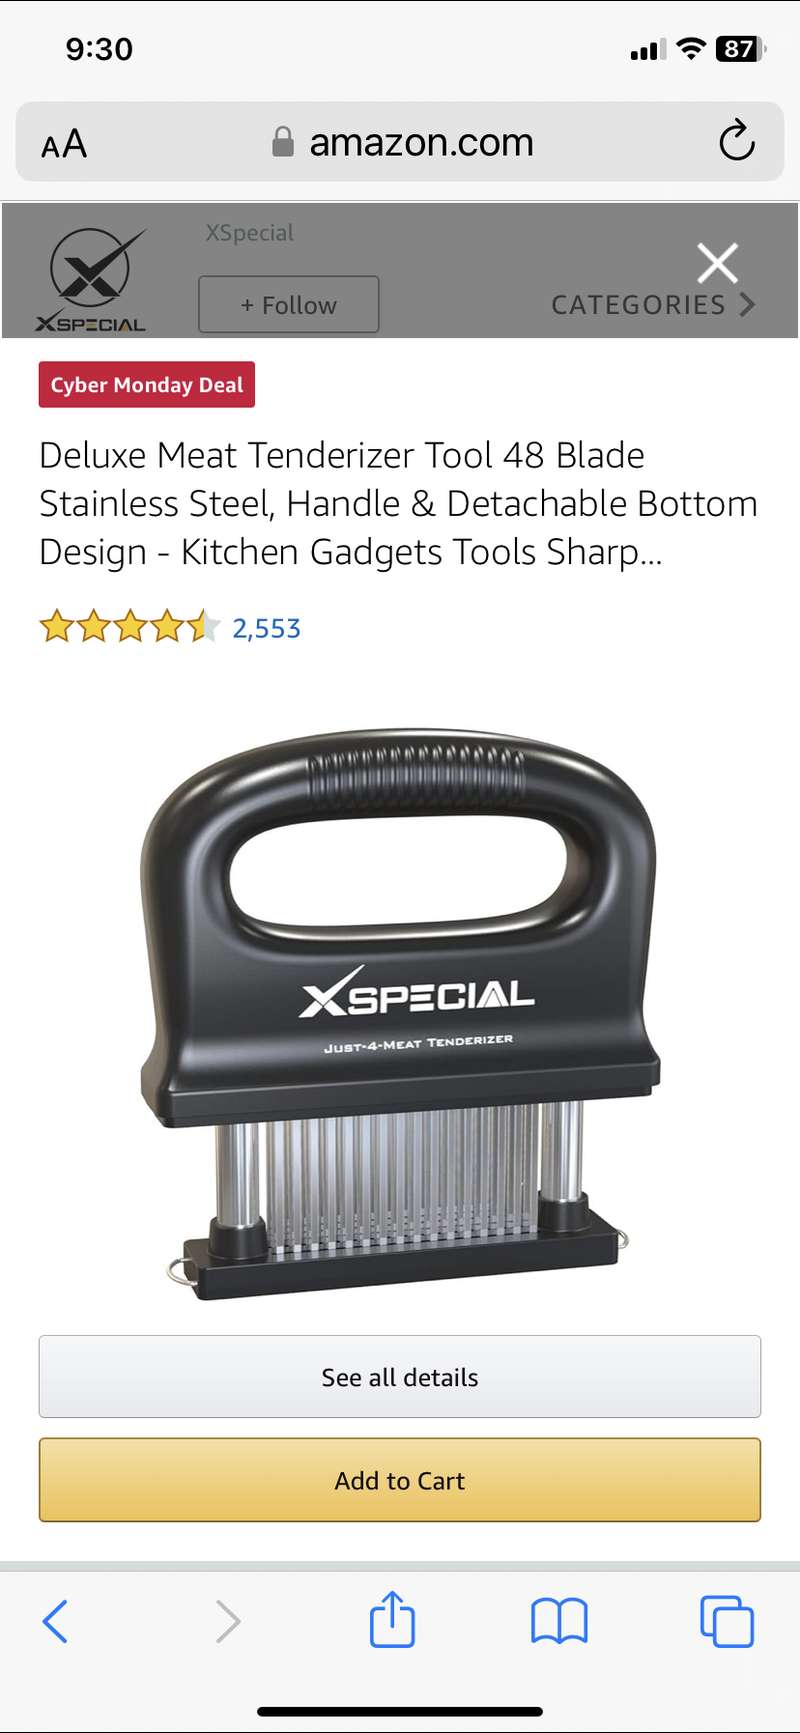 XSpecial Meat Tenderizer Tool 48 Blades Stainless Steel, Easy to